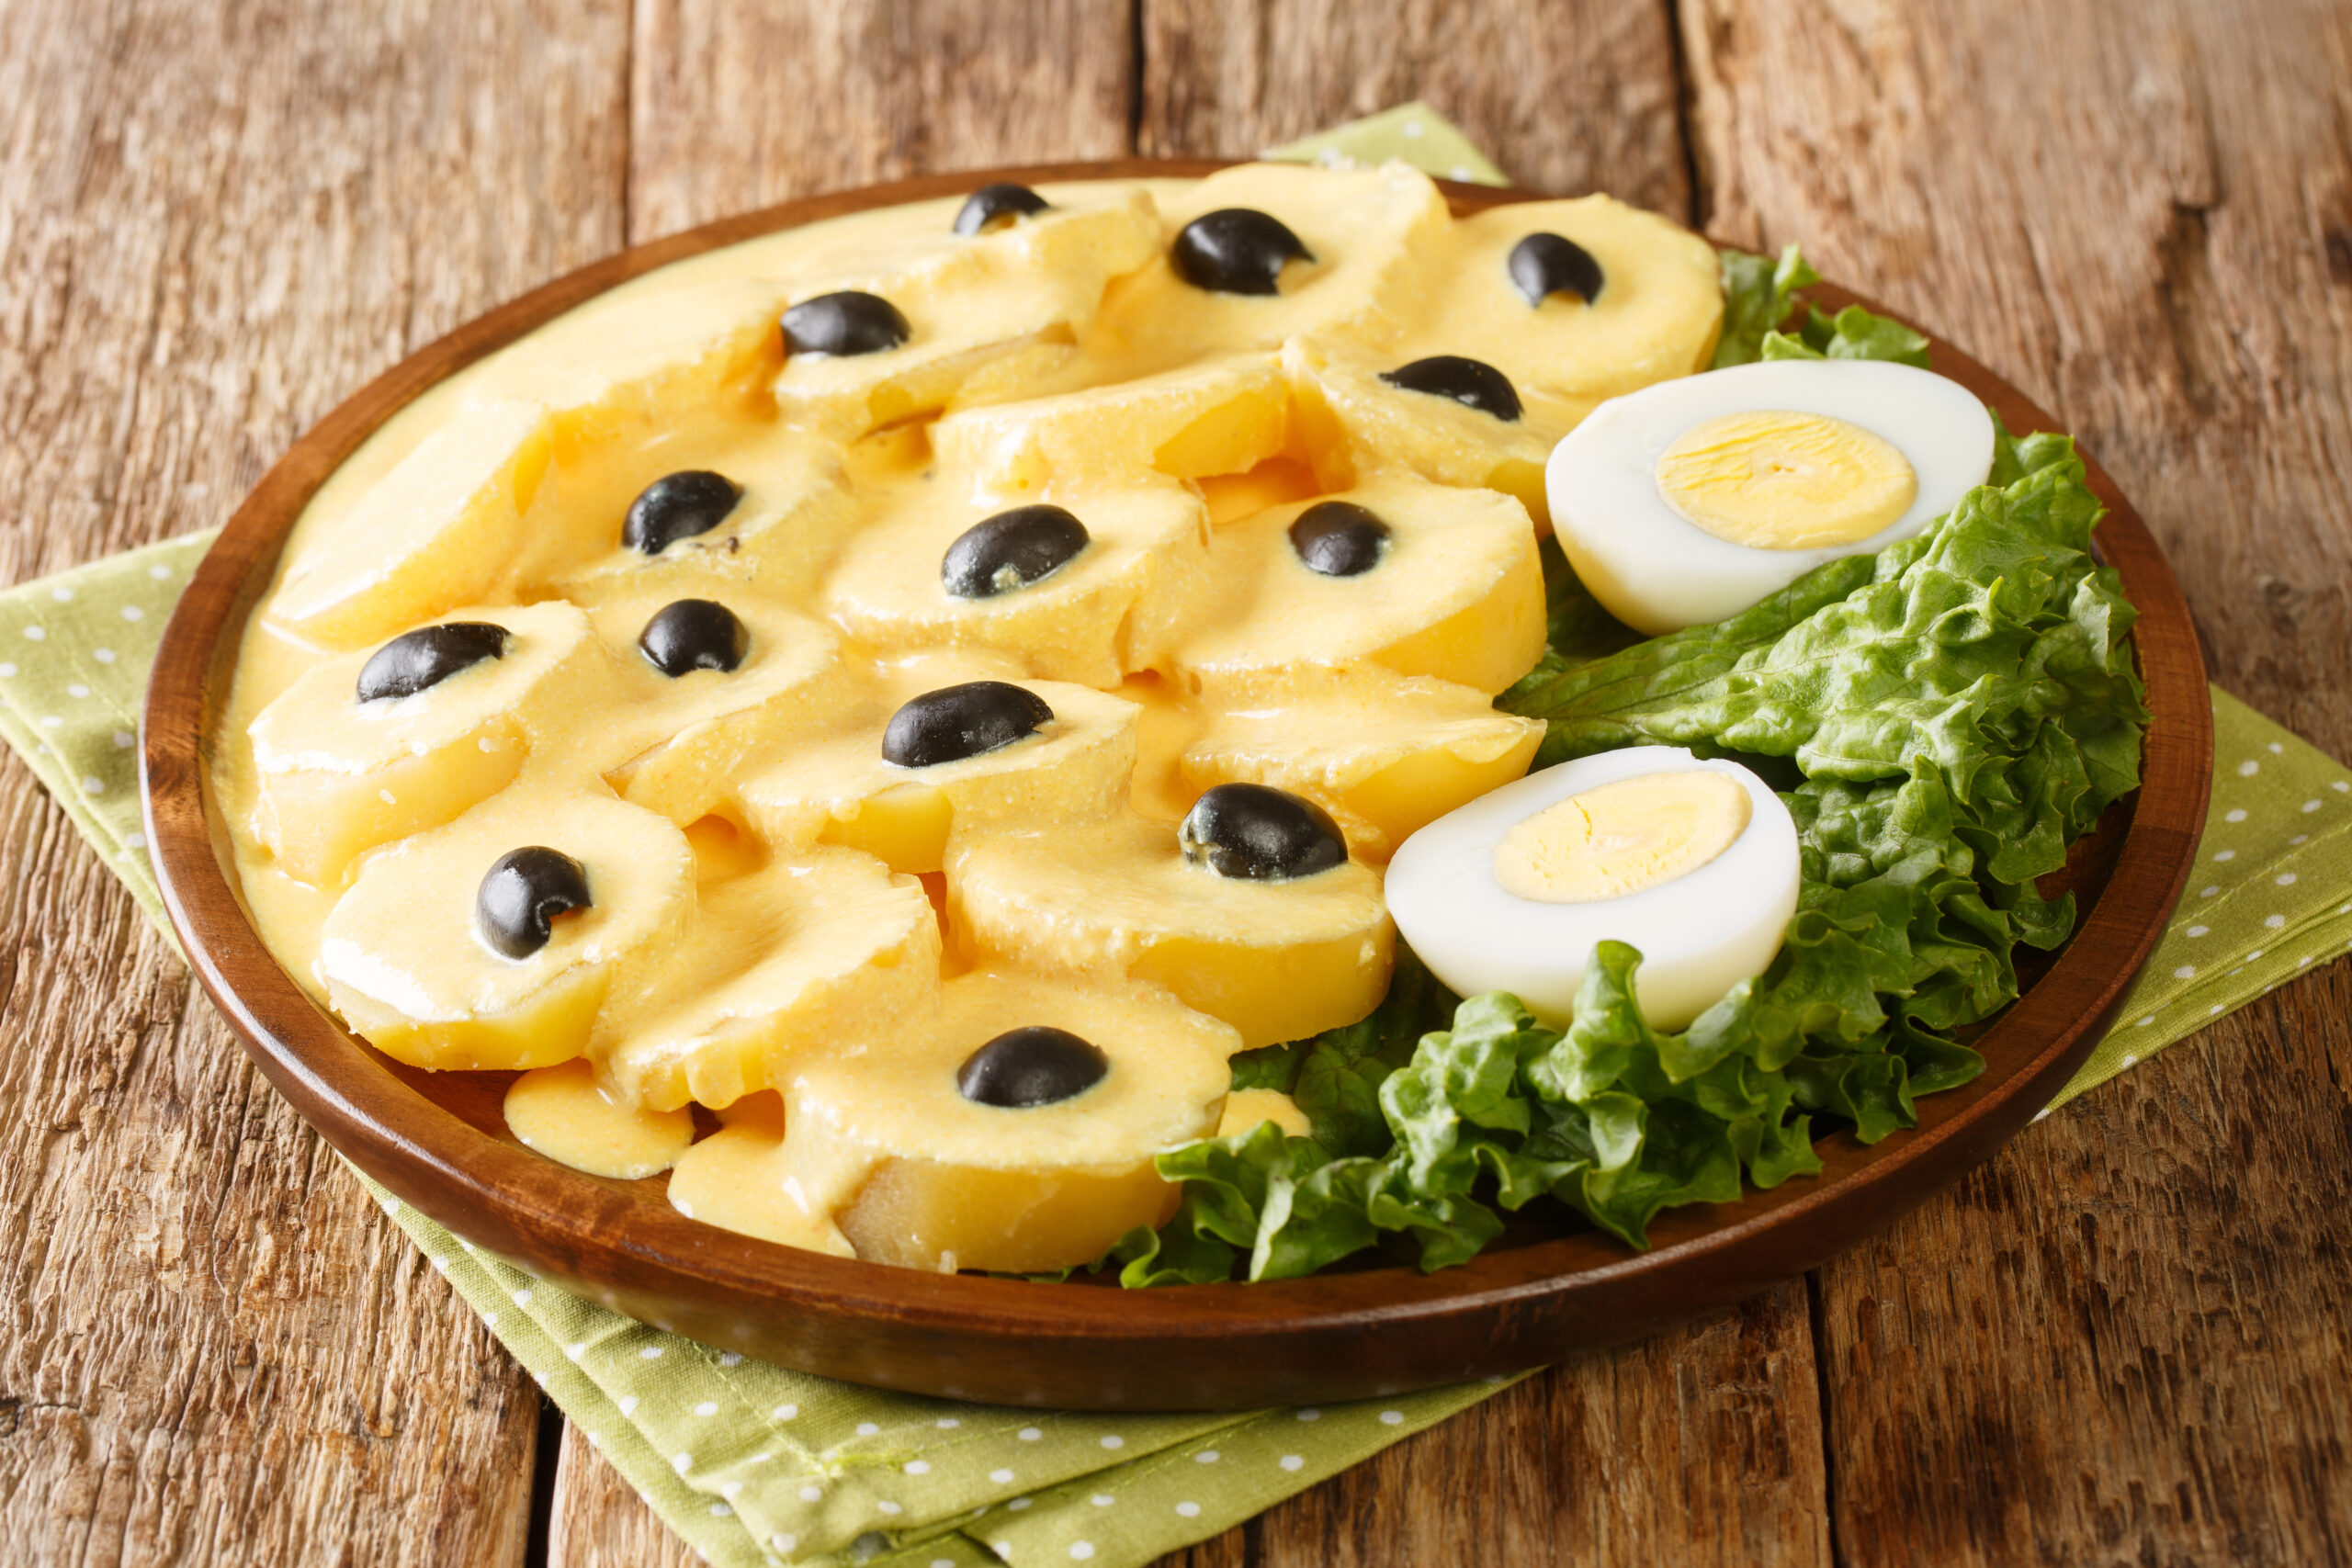 Peruvian cuisine Papa a la huancaína or potatoes Huancayo style boiled potatoes are topped with a creamy cheese sauce close up in the plate on the table. Horizontal